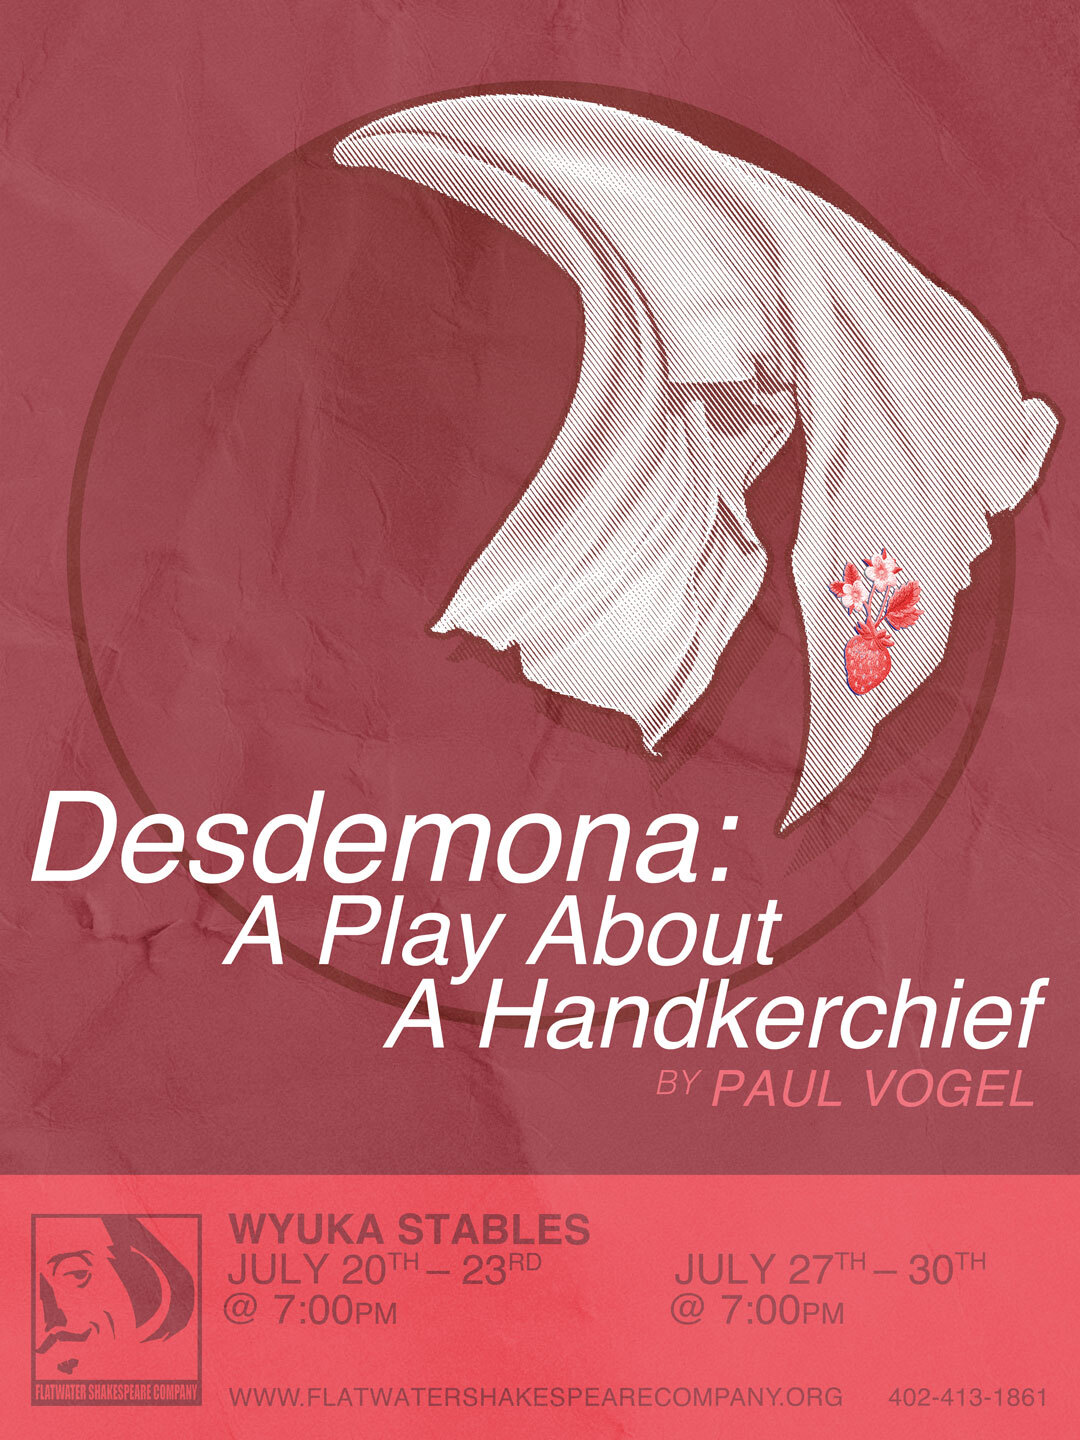 7/20 STU - STUDENT: Thurs. July 20, 2023 | 7:00 p.m. - 10:00 p.m. CST | Wyuka Stables (Desdemona: A Play about a Handkerchief)